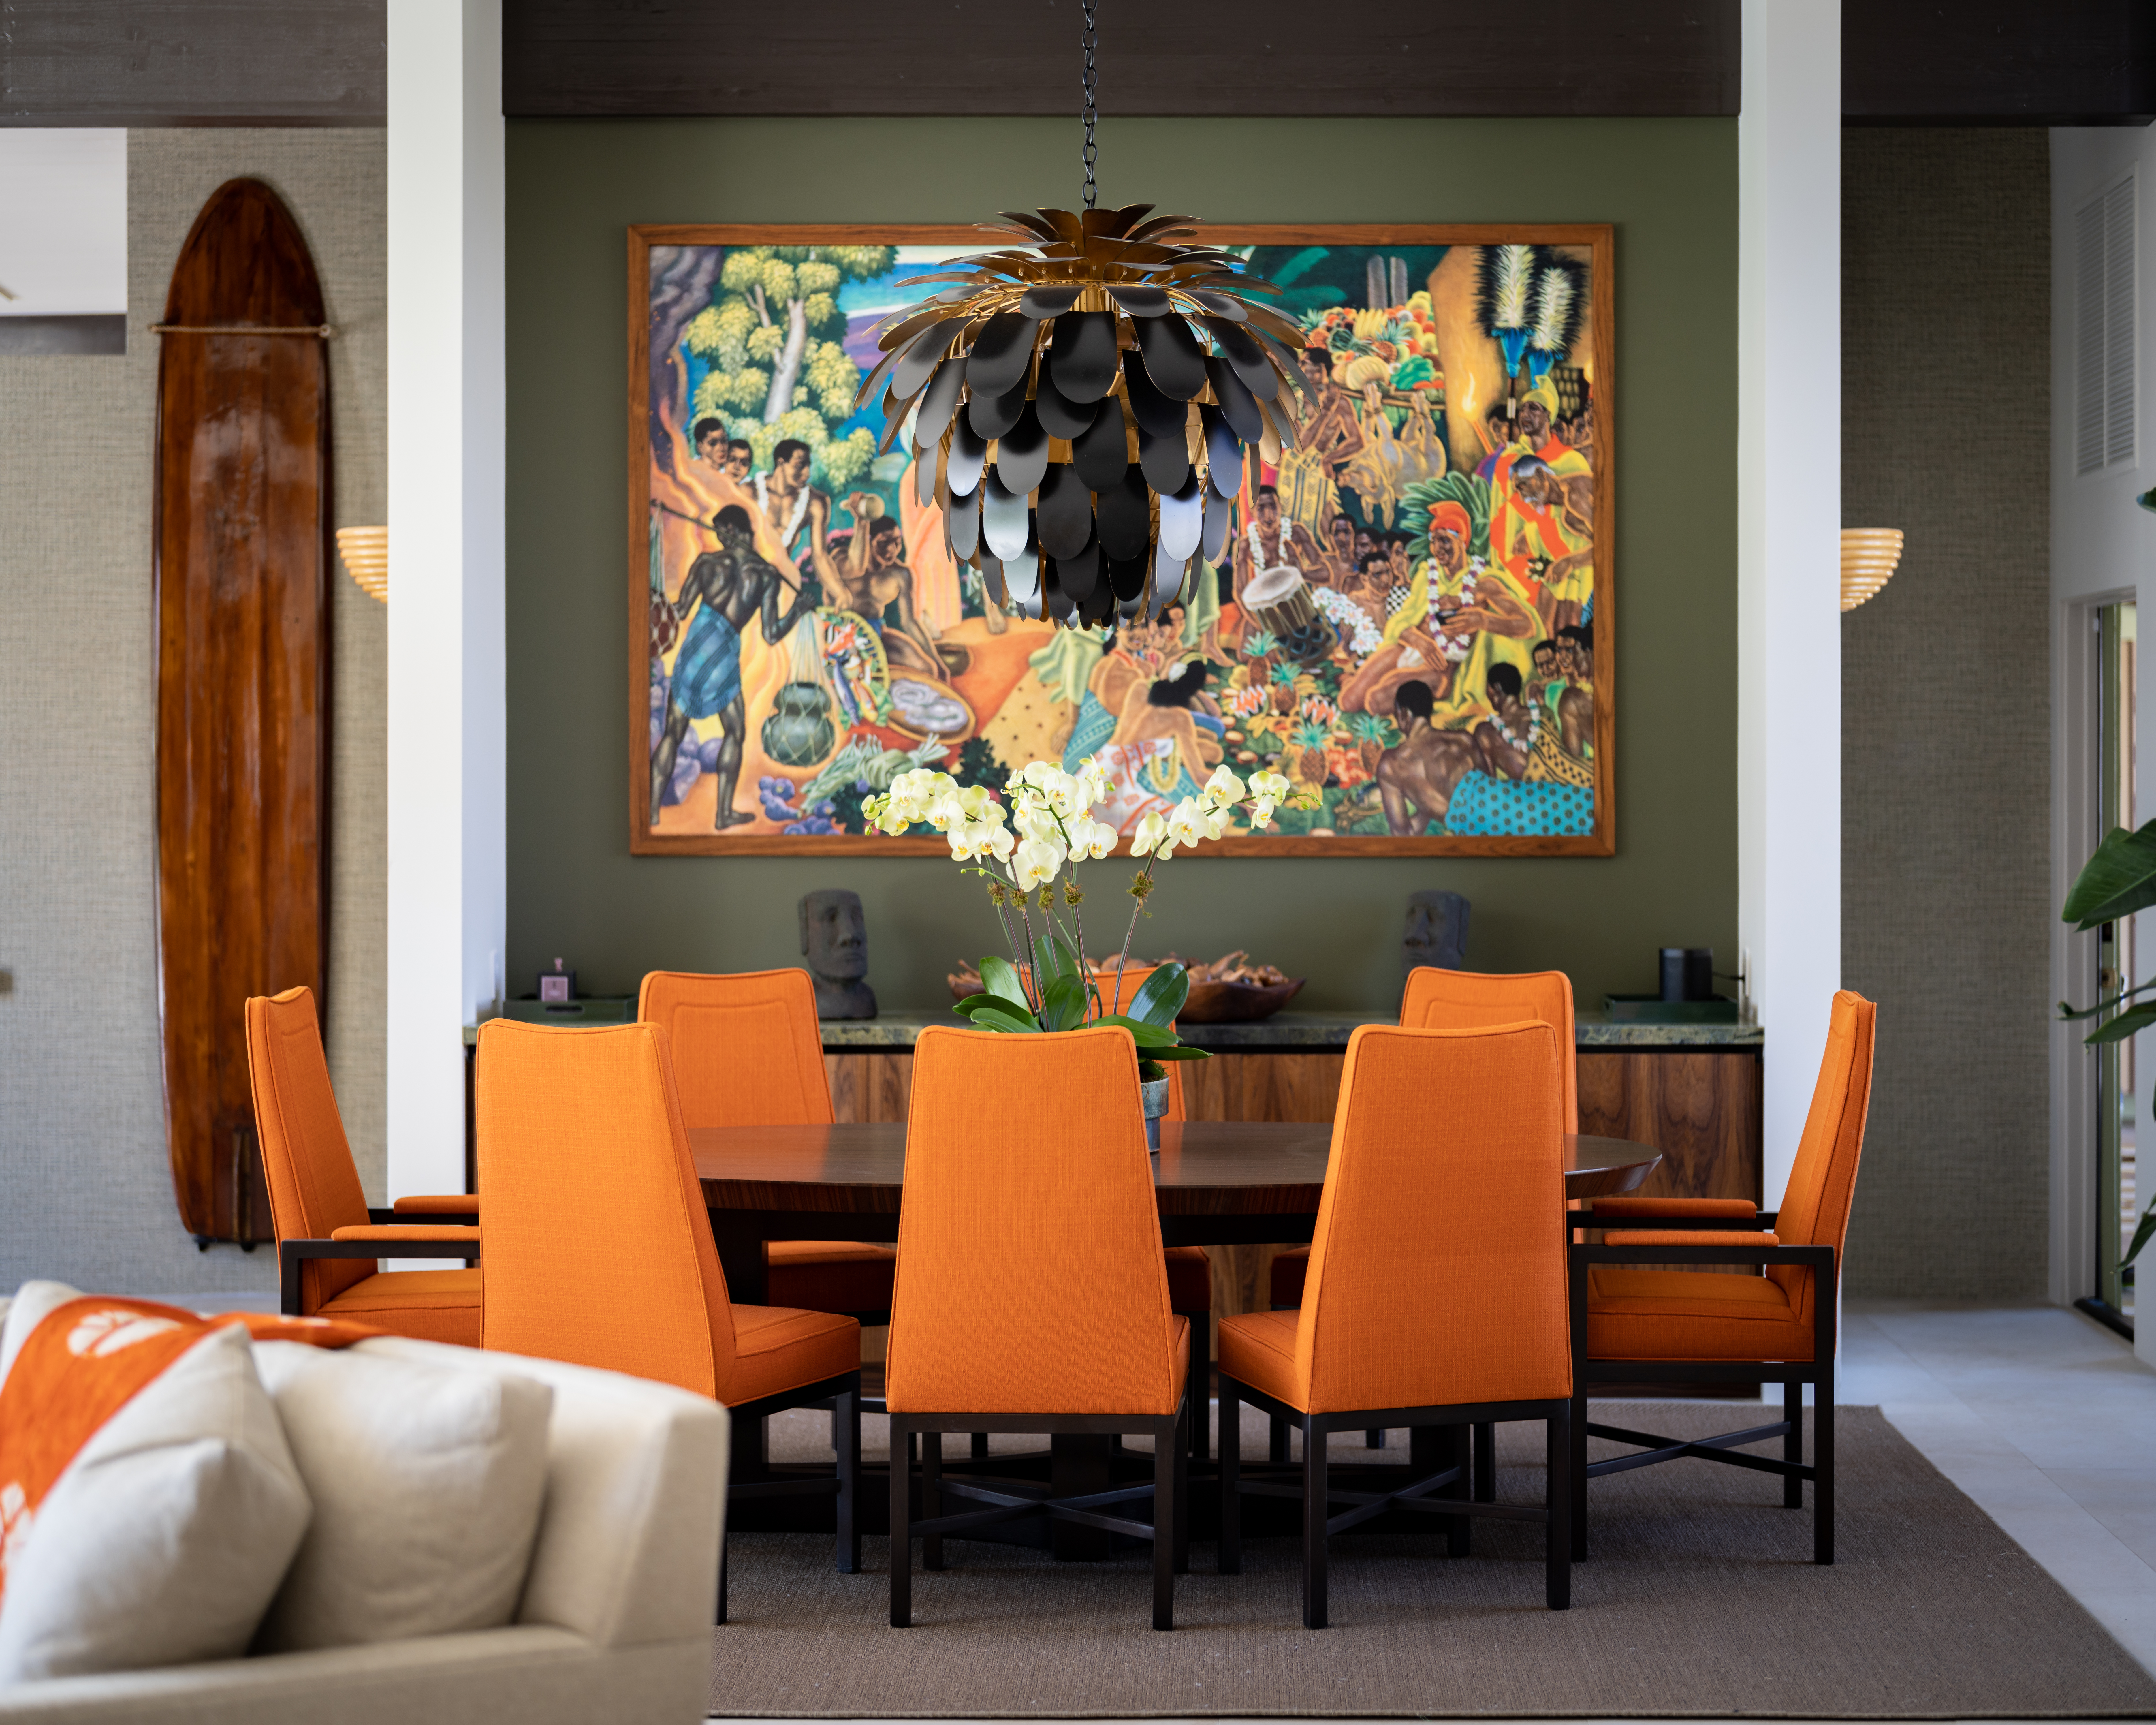 The green-and-orange palette of the family room continues in the dining room by Michael Berman of Michael Berman Ltd., the show home’s lead designer. Surrounded by walls clad in pale grass cloth, the olive-green alcove wall draws attention to the reproduction on ceramic of Eugene Savage’s 1940 mural Island Feast and to the carvings displayed on the marble top of the built-in sideboard. Find a similar lighting fixture here.
